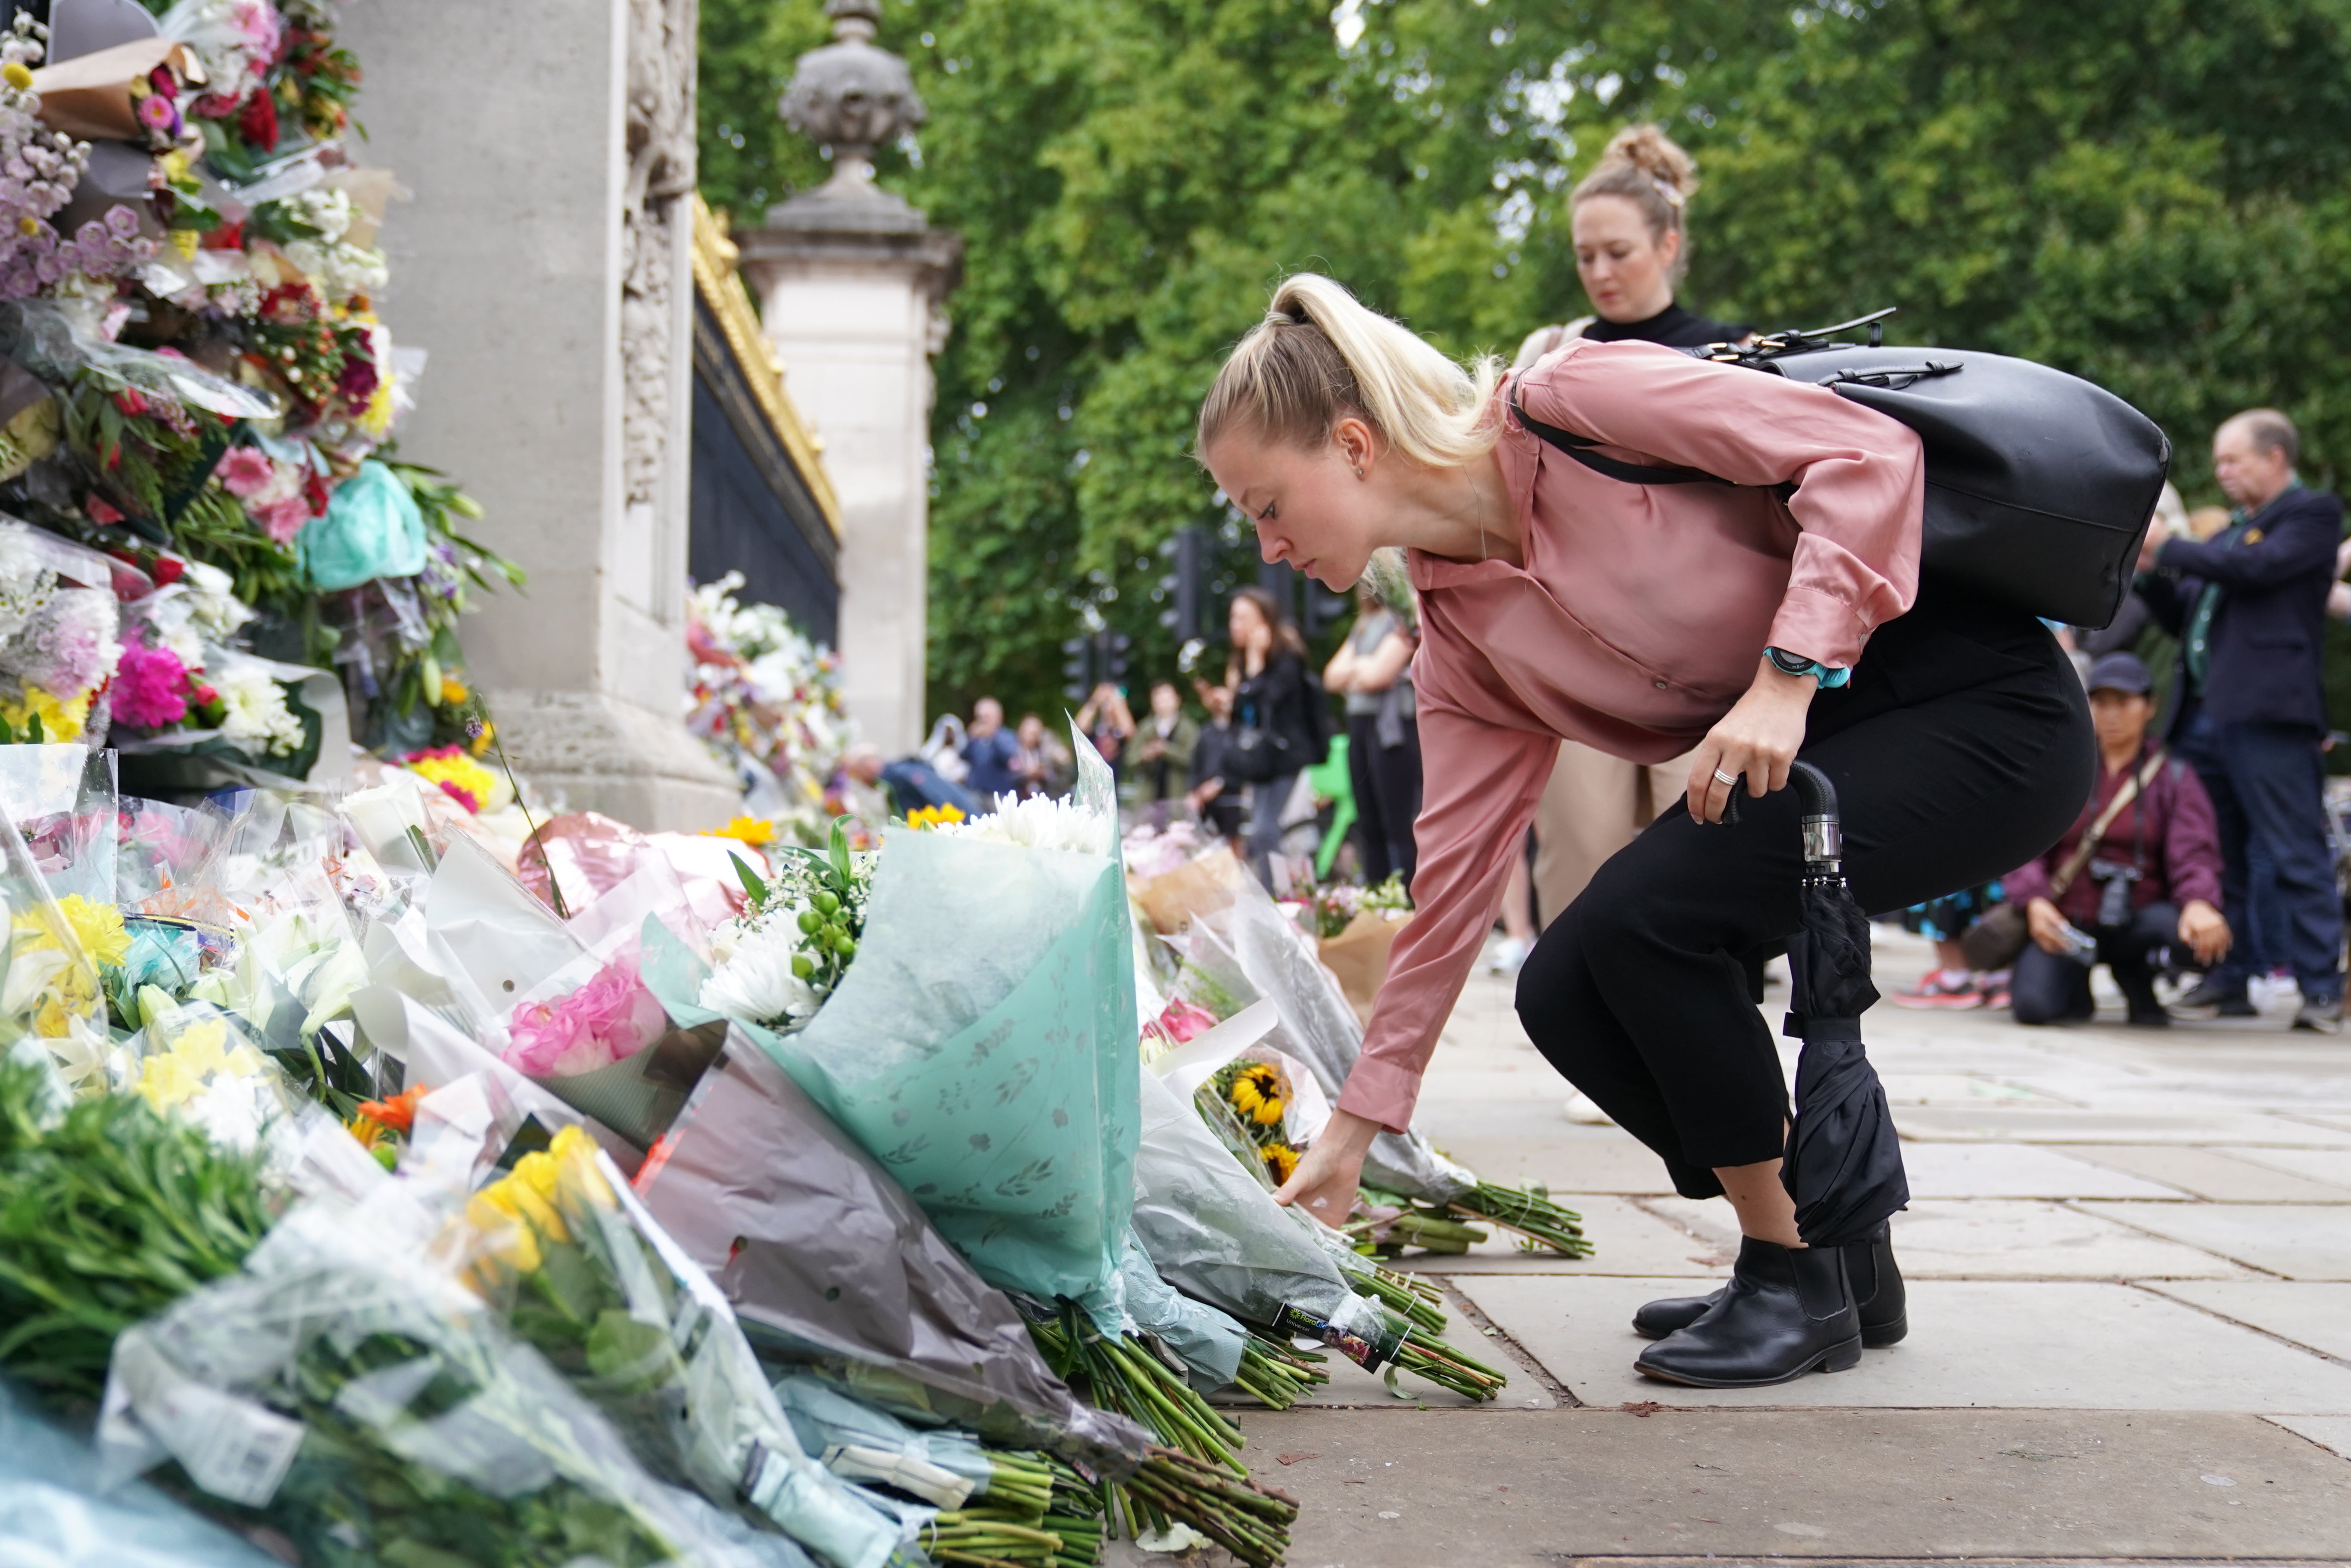 A woman lays flowers outside Buckingham Palace (Kirsty O’Connor/PA)